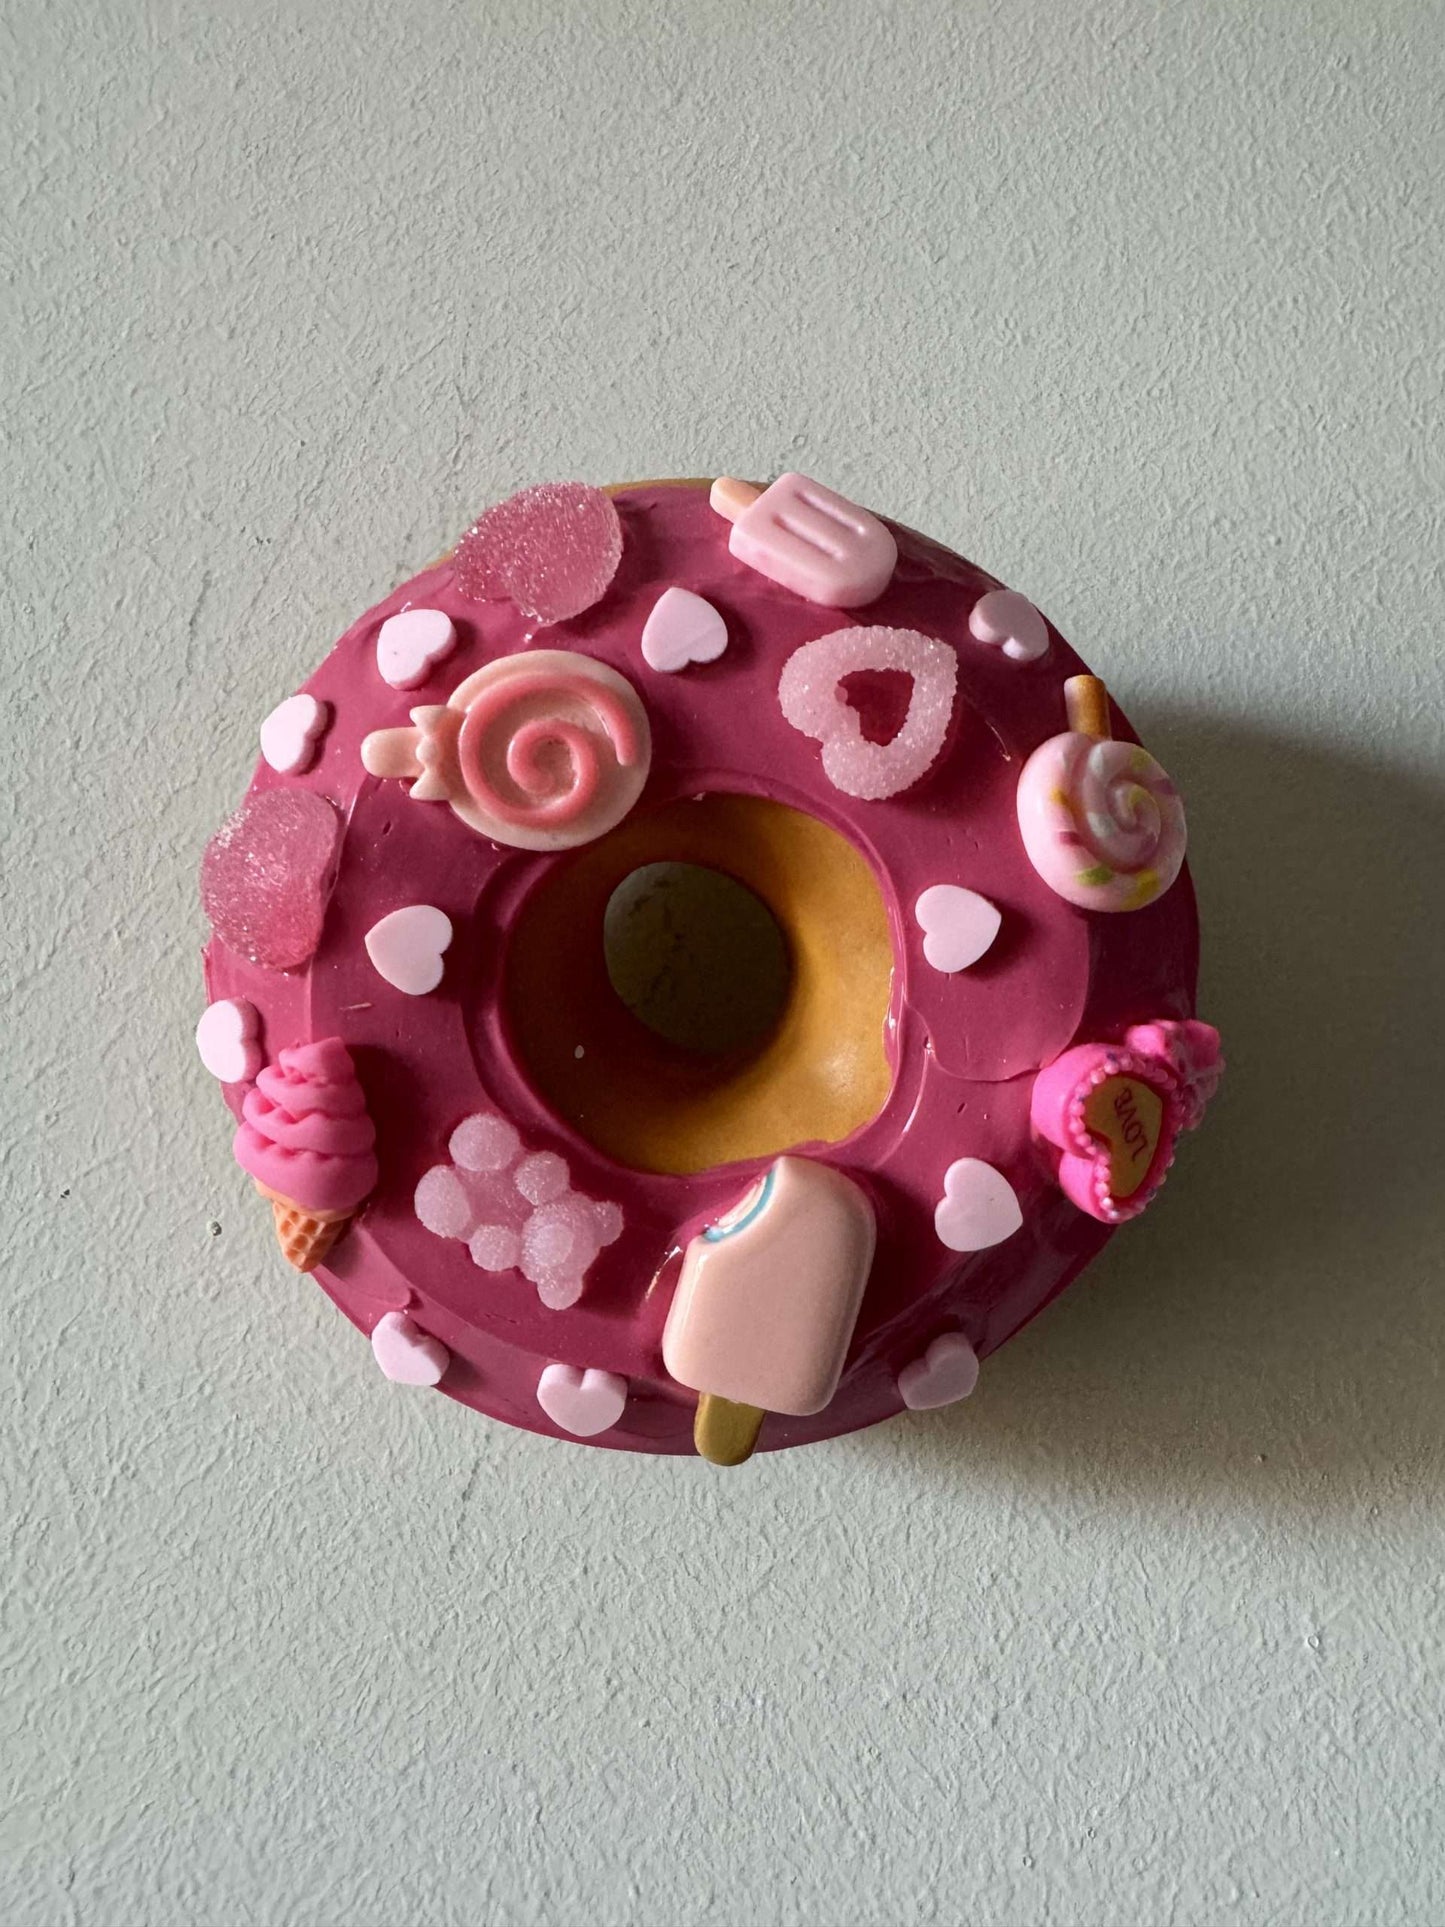 Donut with fuchsia icing and colored candies